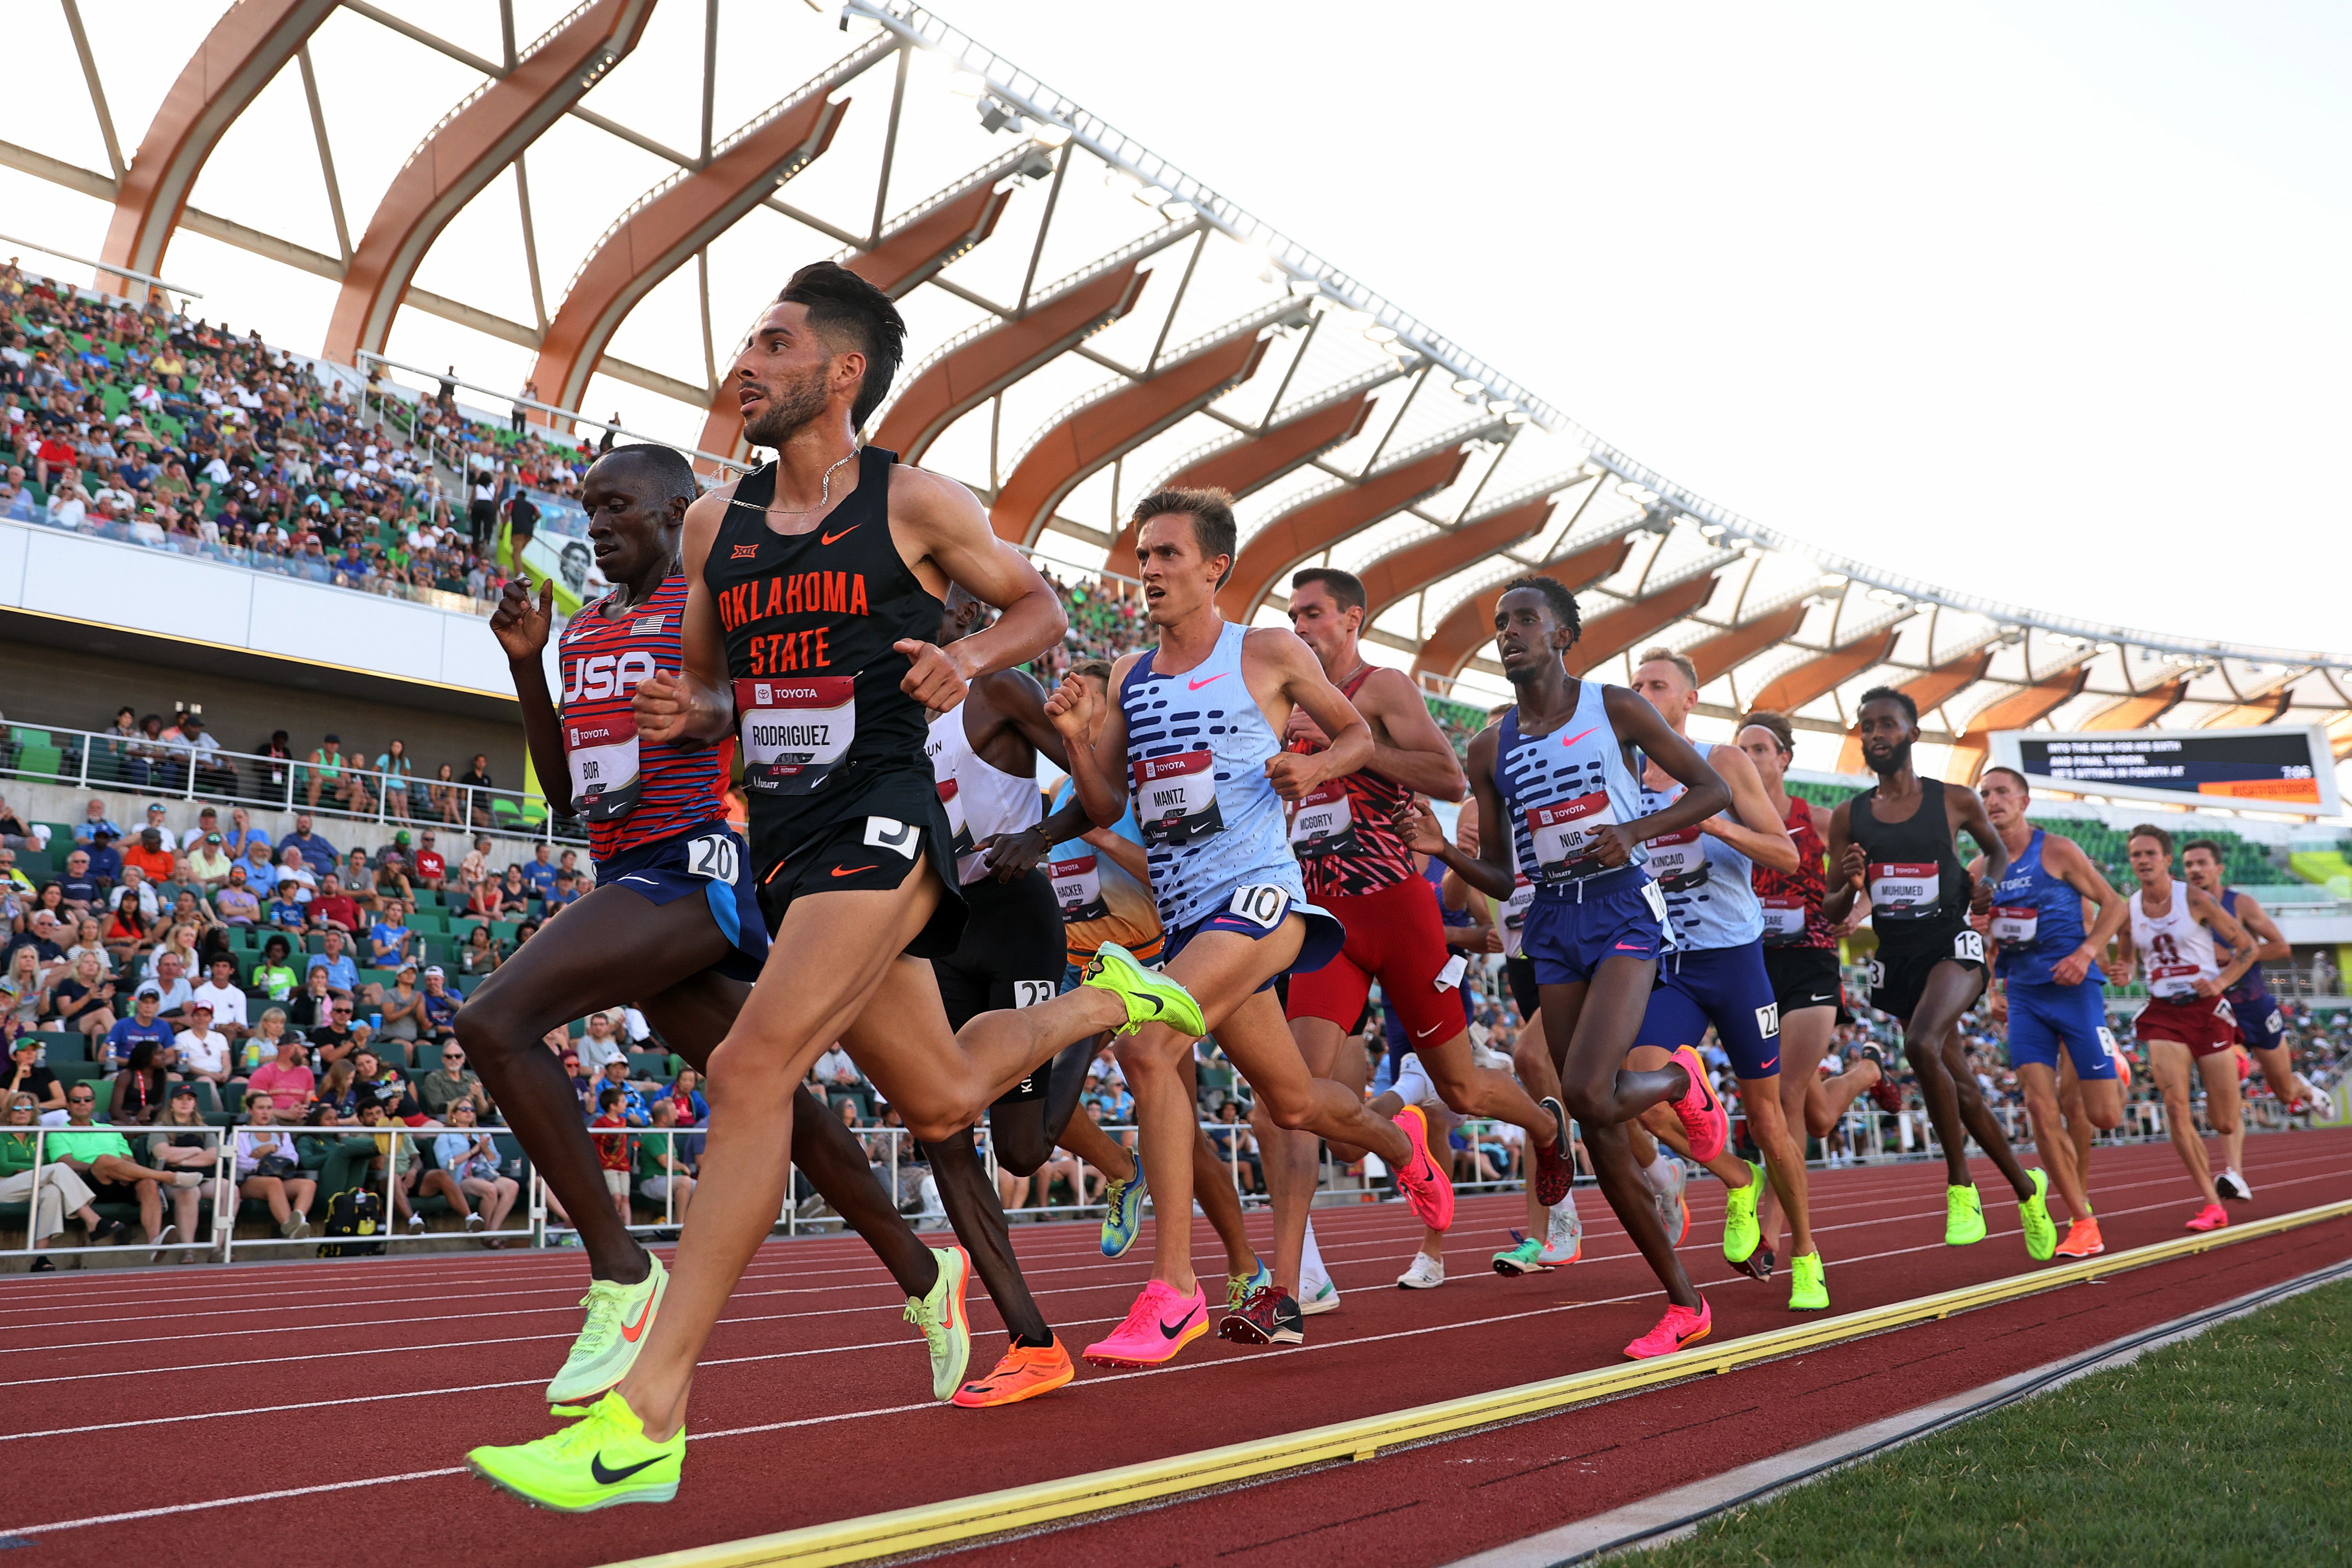 Coburn runs to 9th time as US Steeplechase Champion, Falland has